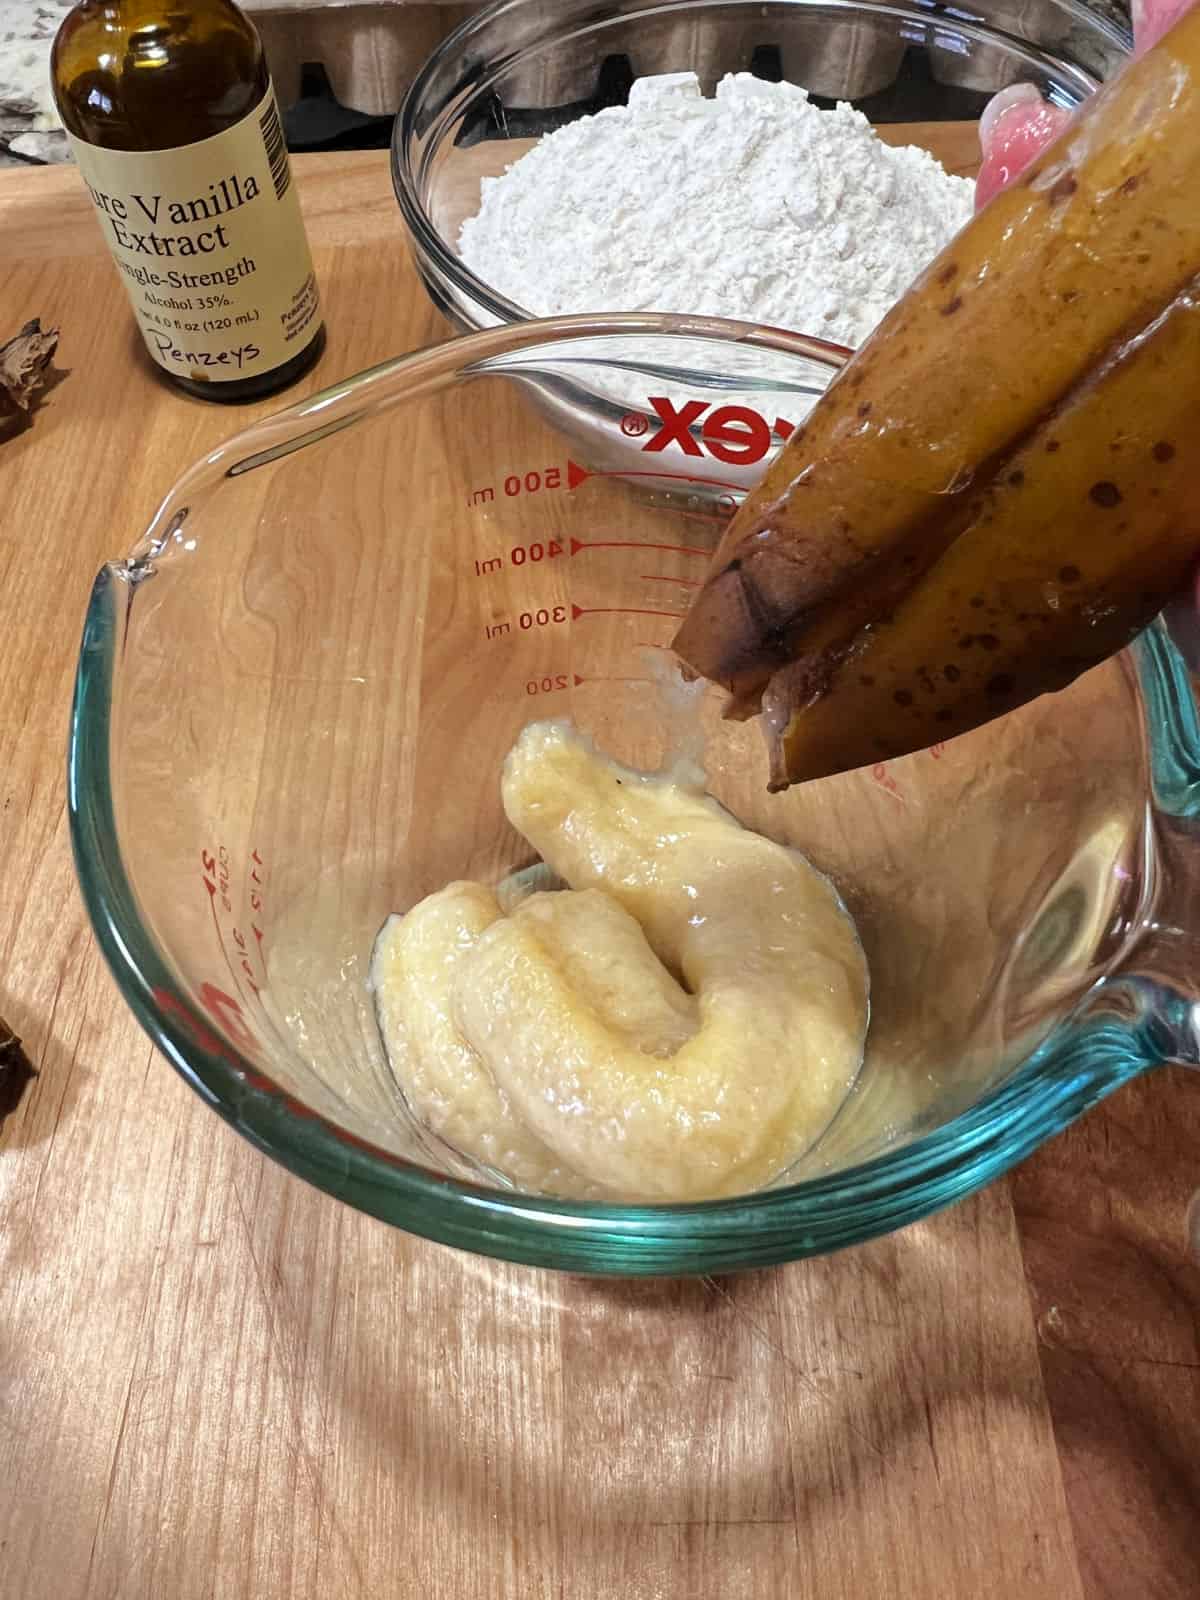 thawed from frozen banana being squeezed into measuring cup.